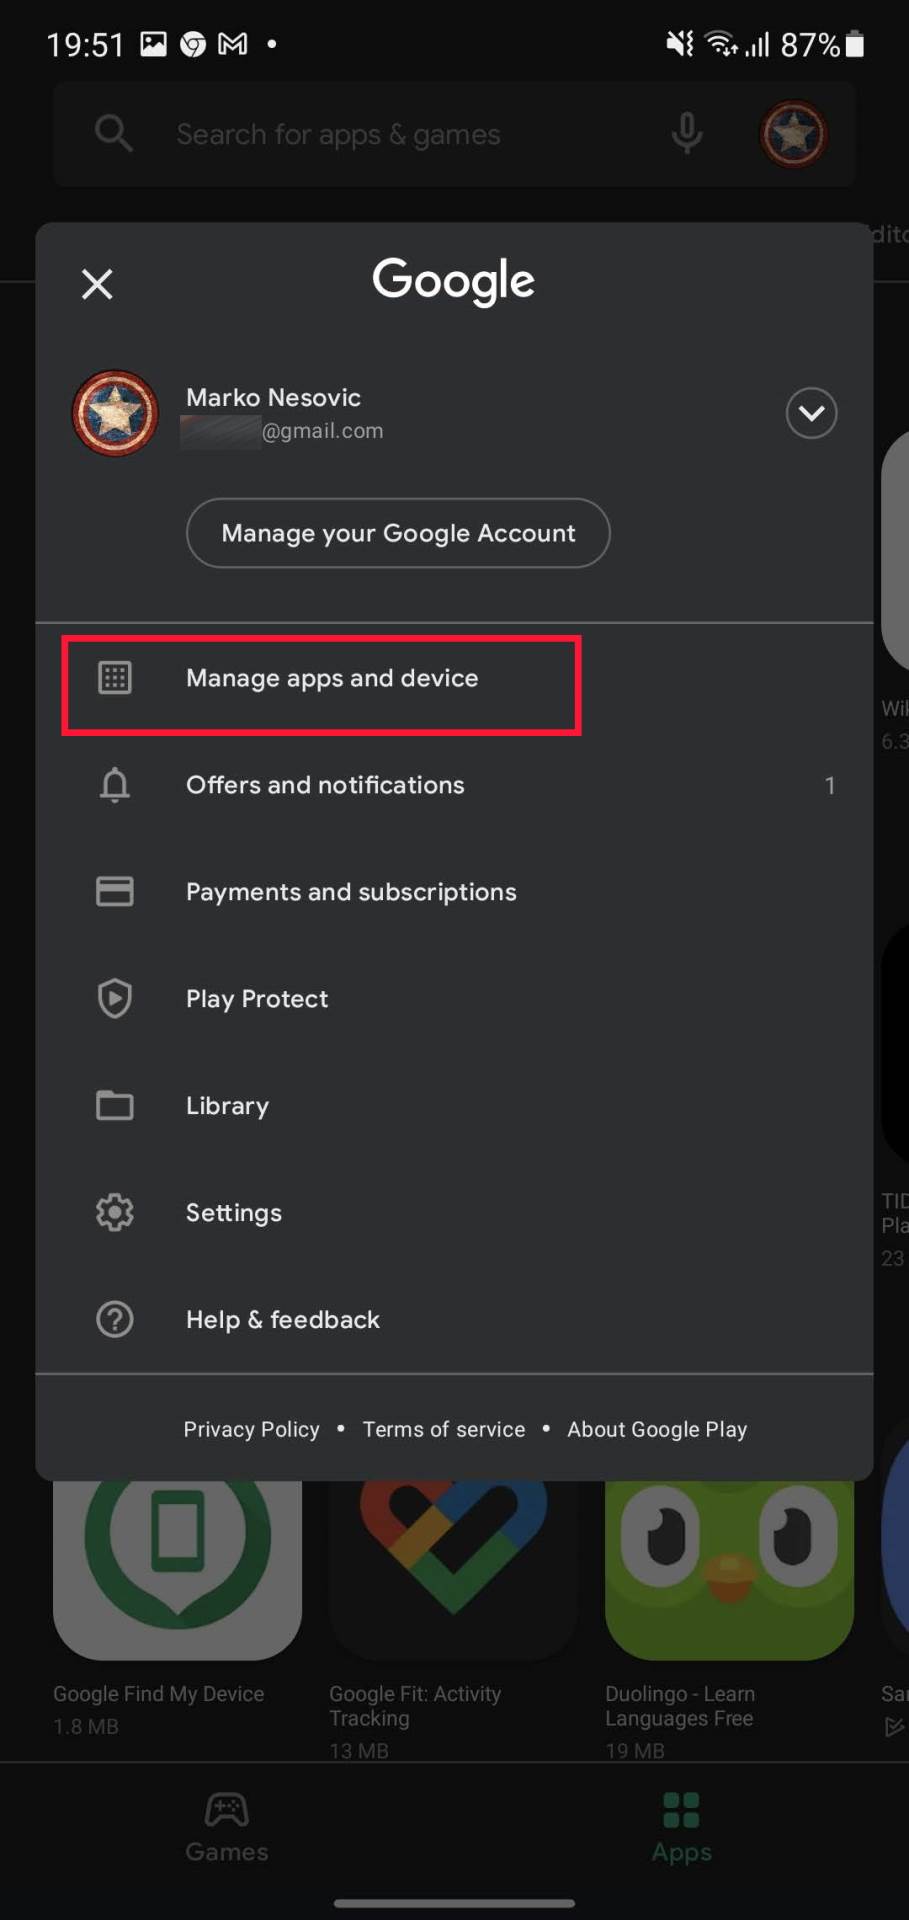  Odaberite opciju Manage apps and devices 